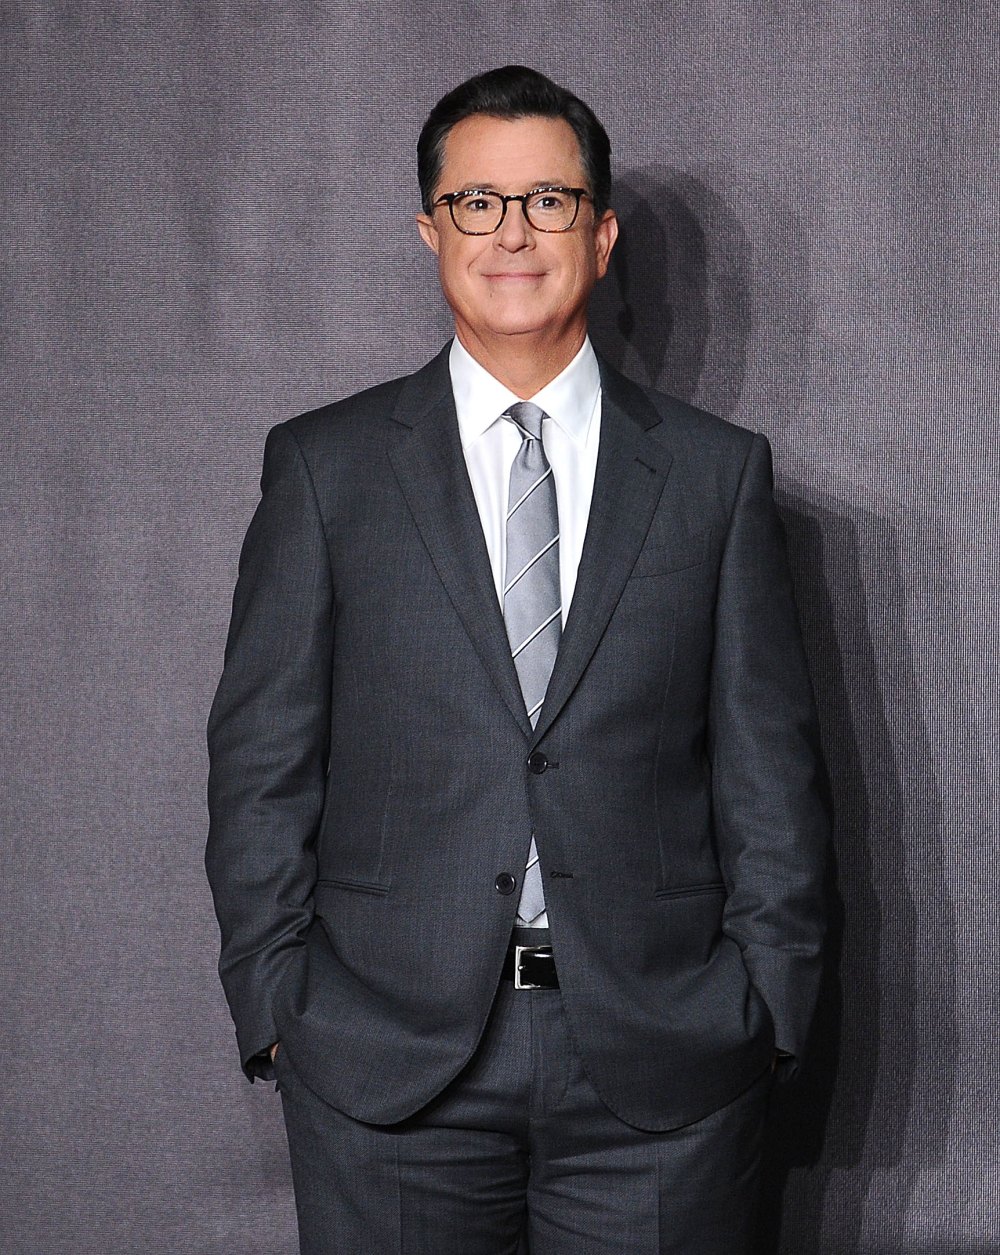 Stephen Colbert Shares He Lost 14 Lbs After Appendix Surgery